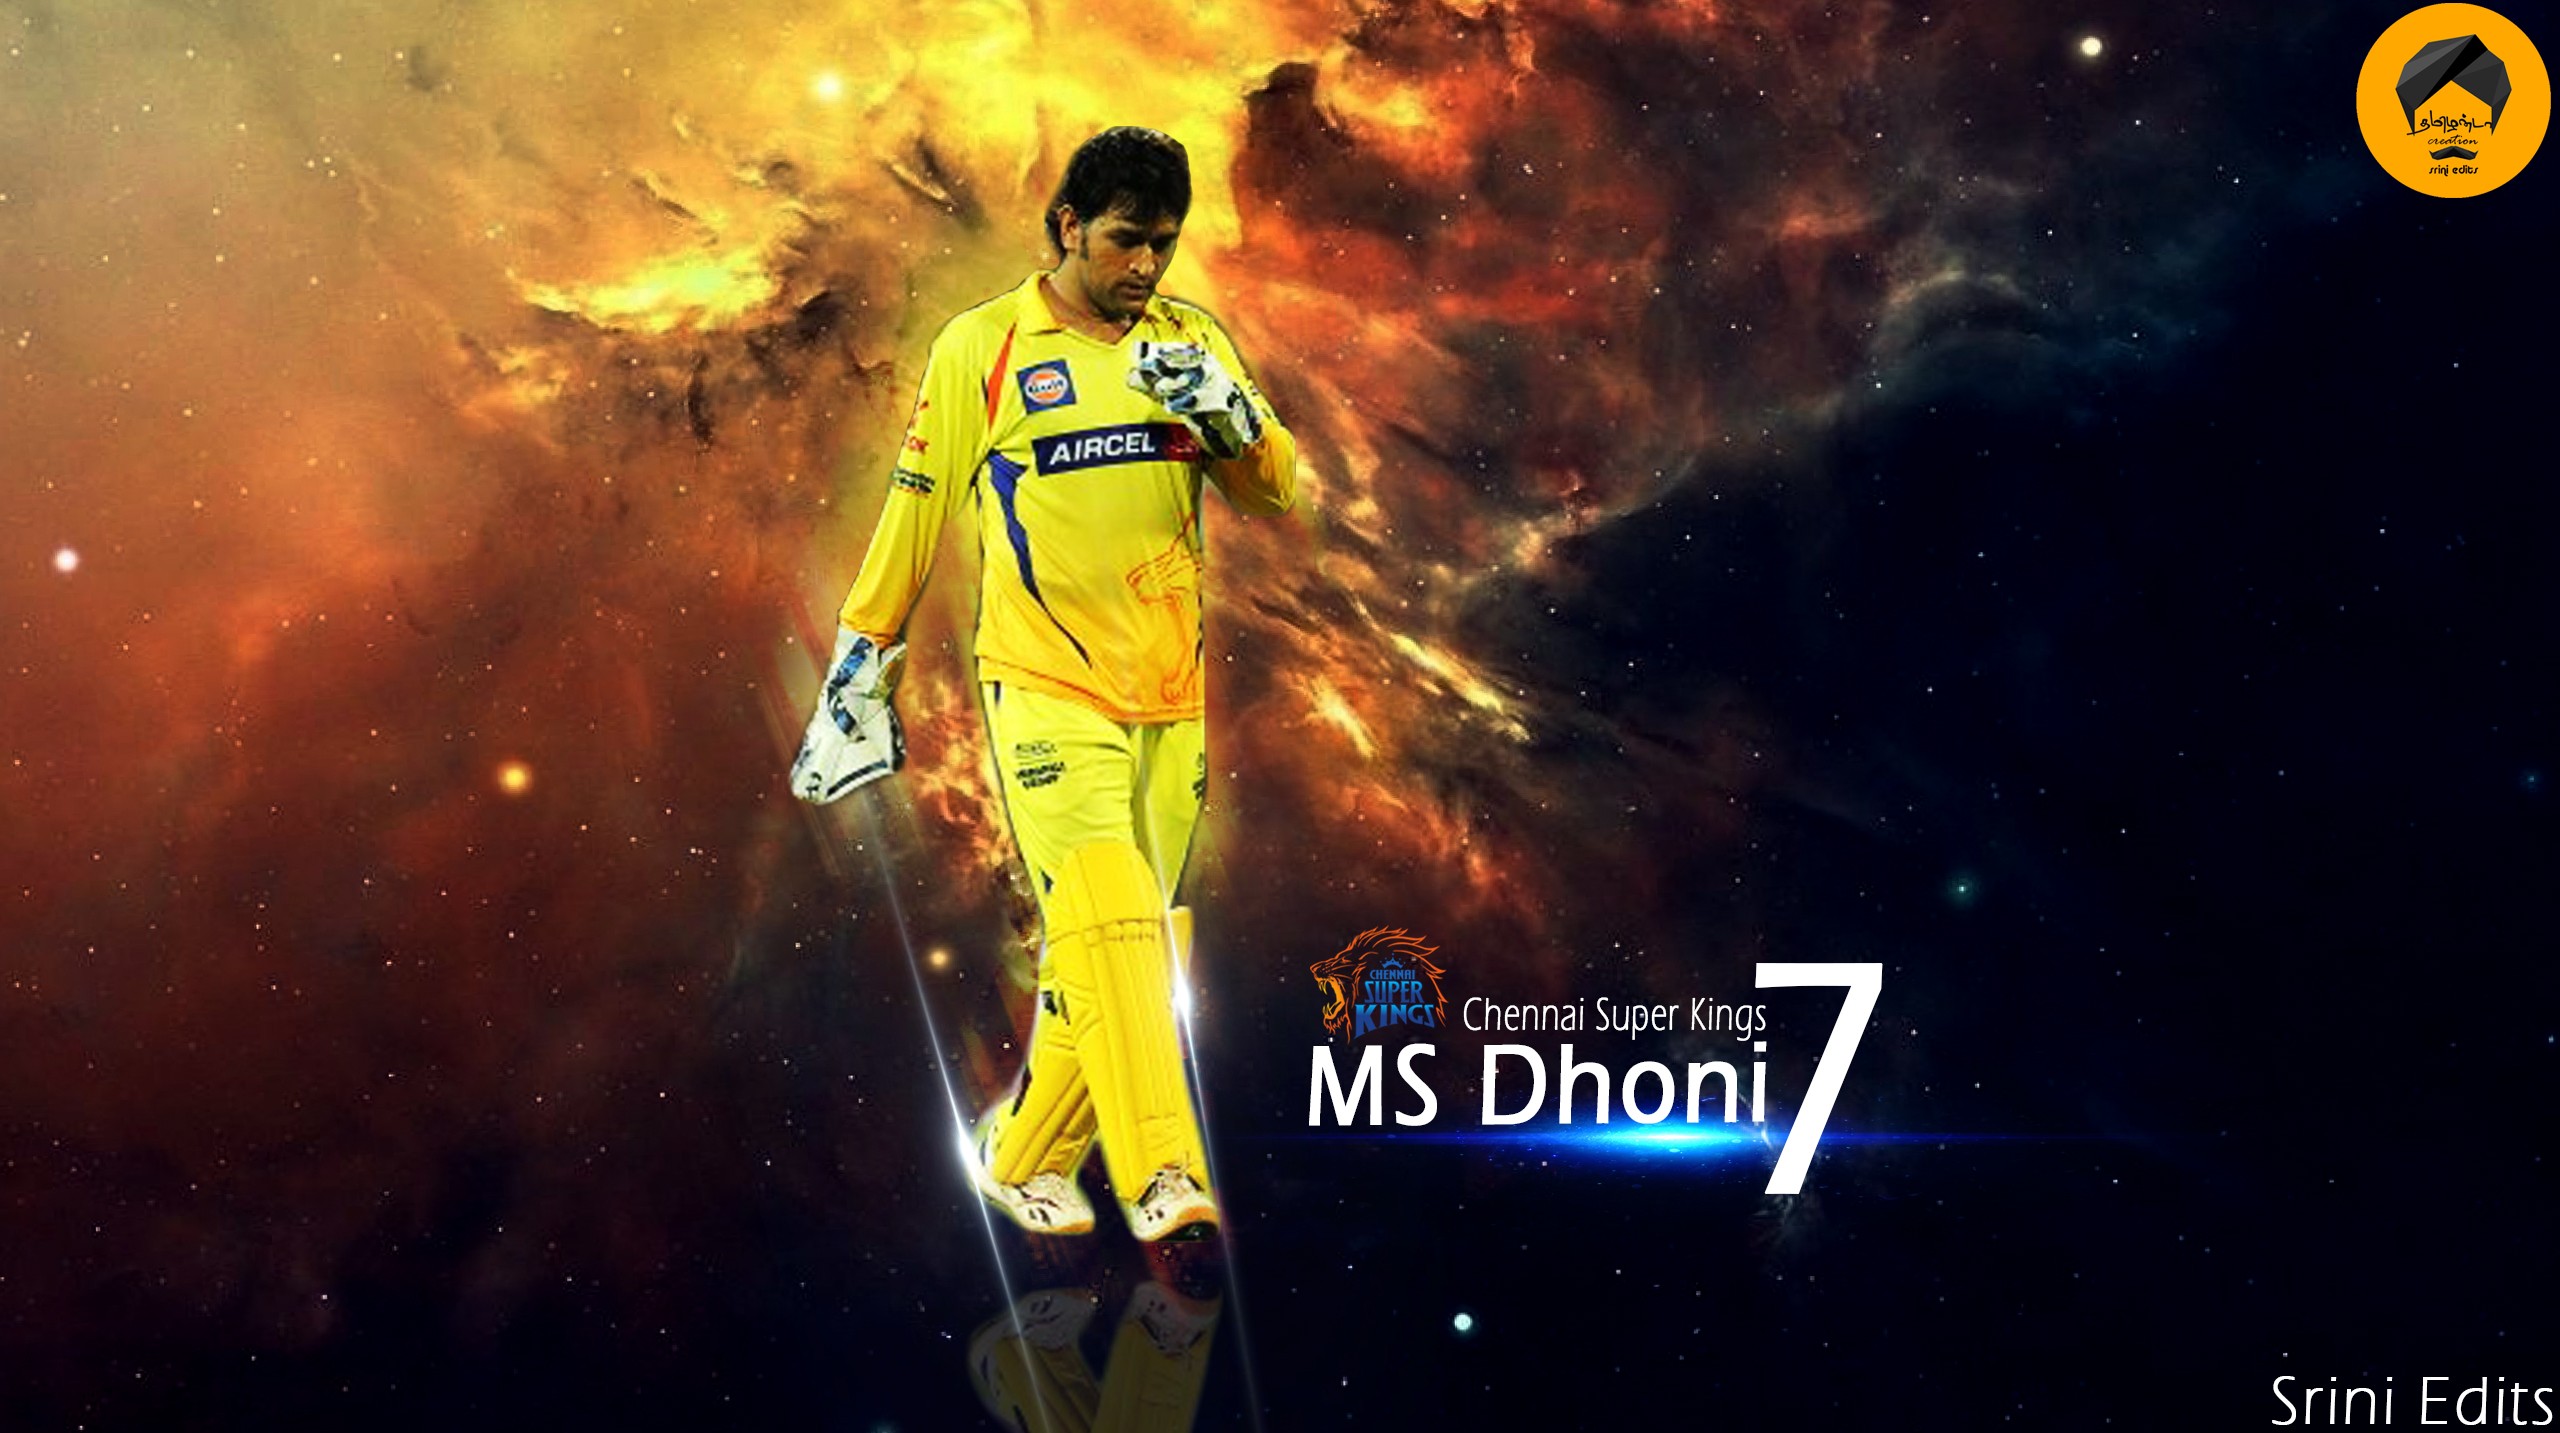 Ms Dhoni Chennai Super Kings Galaxy Wallpapers Hd Desktop And Mobile Backgrounds